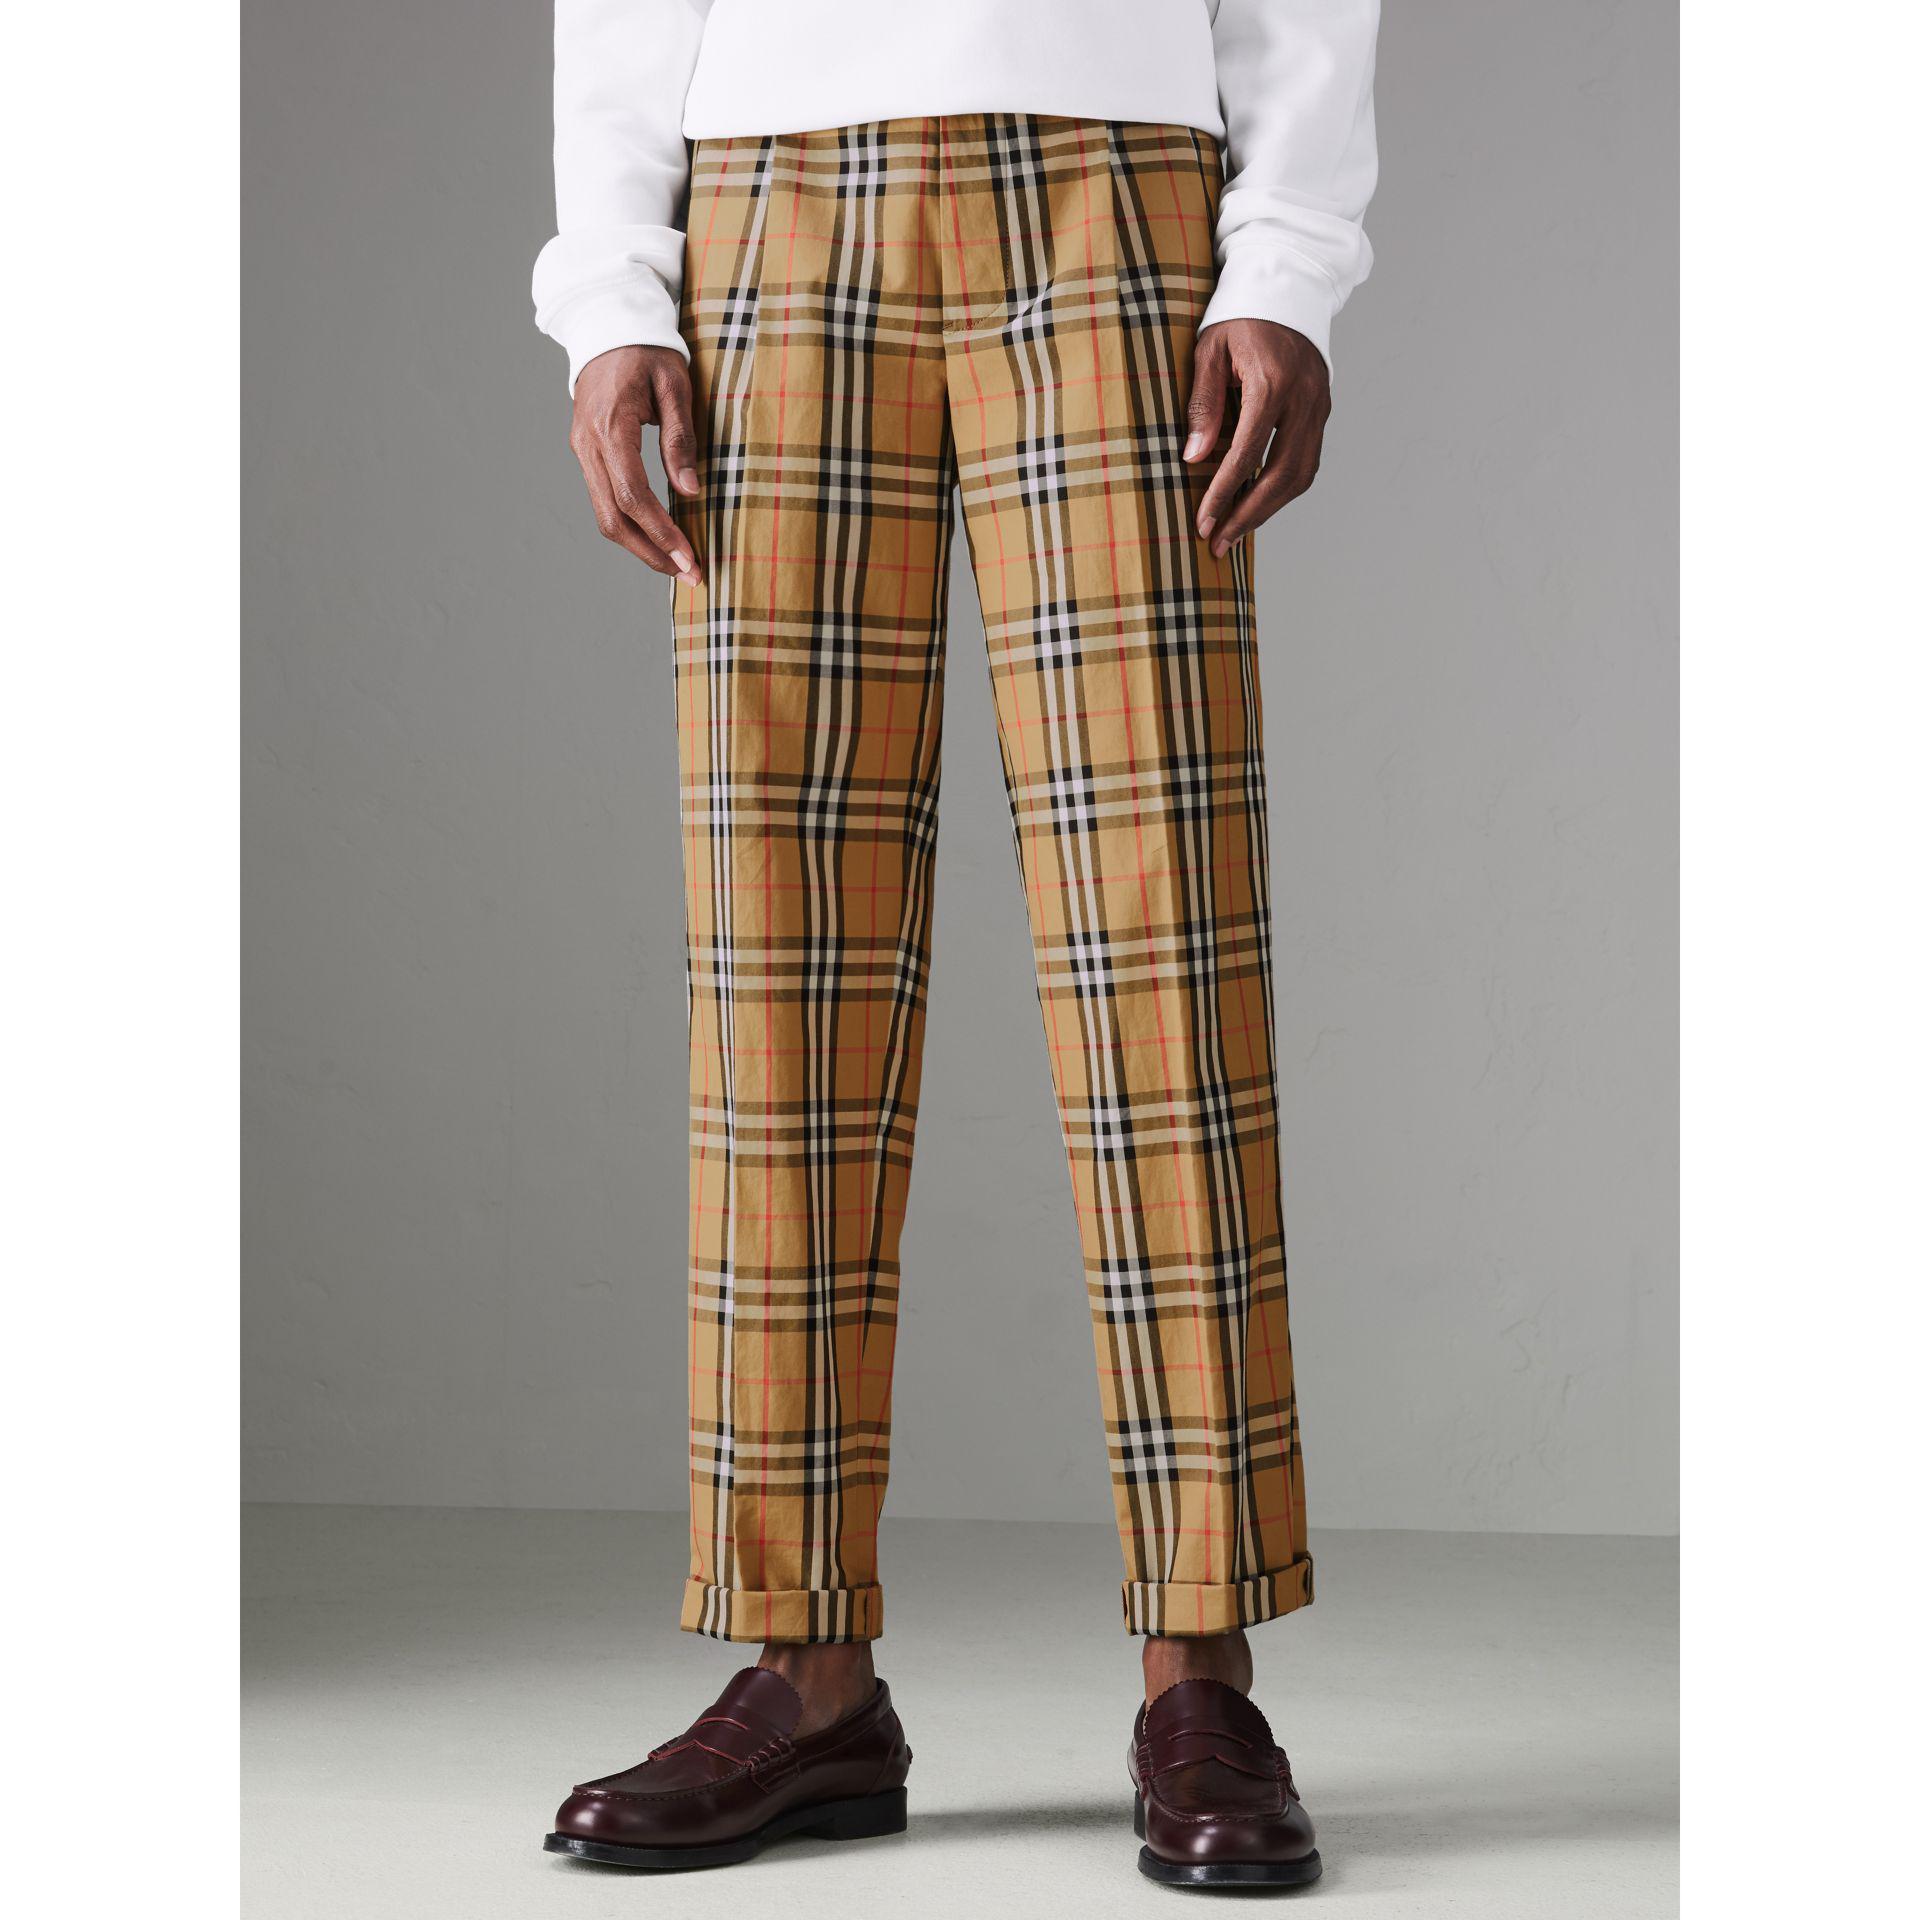 Authentic BNWT Burberry Mens Trousers - Pants